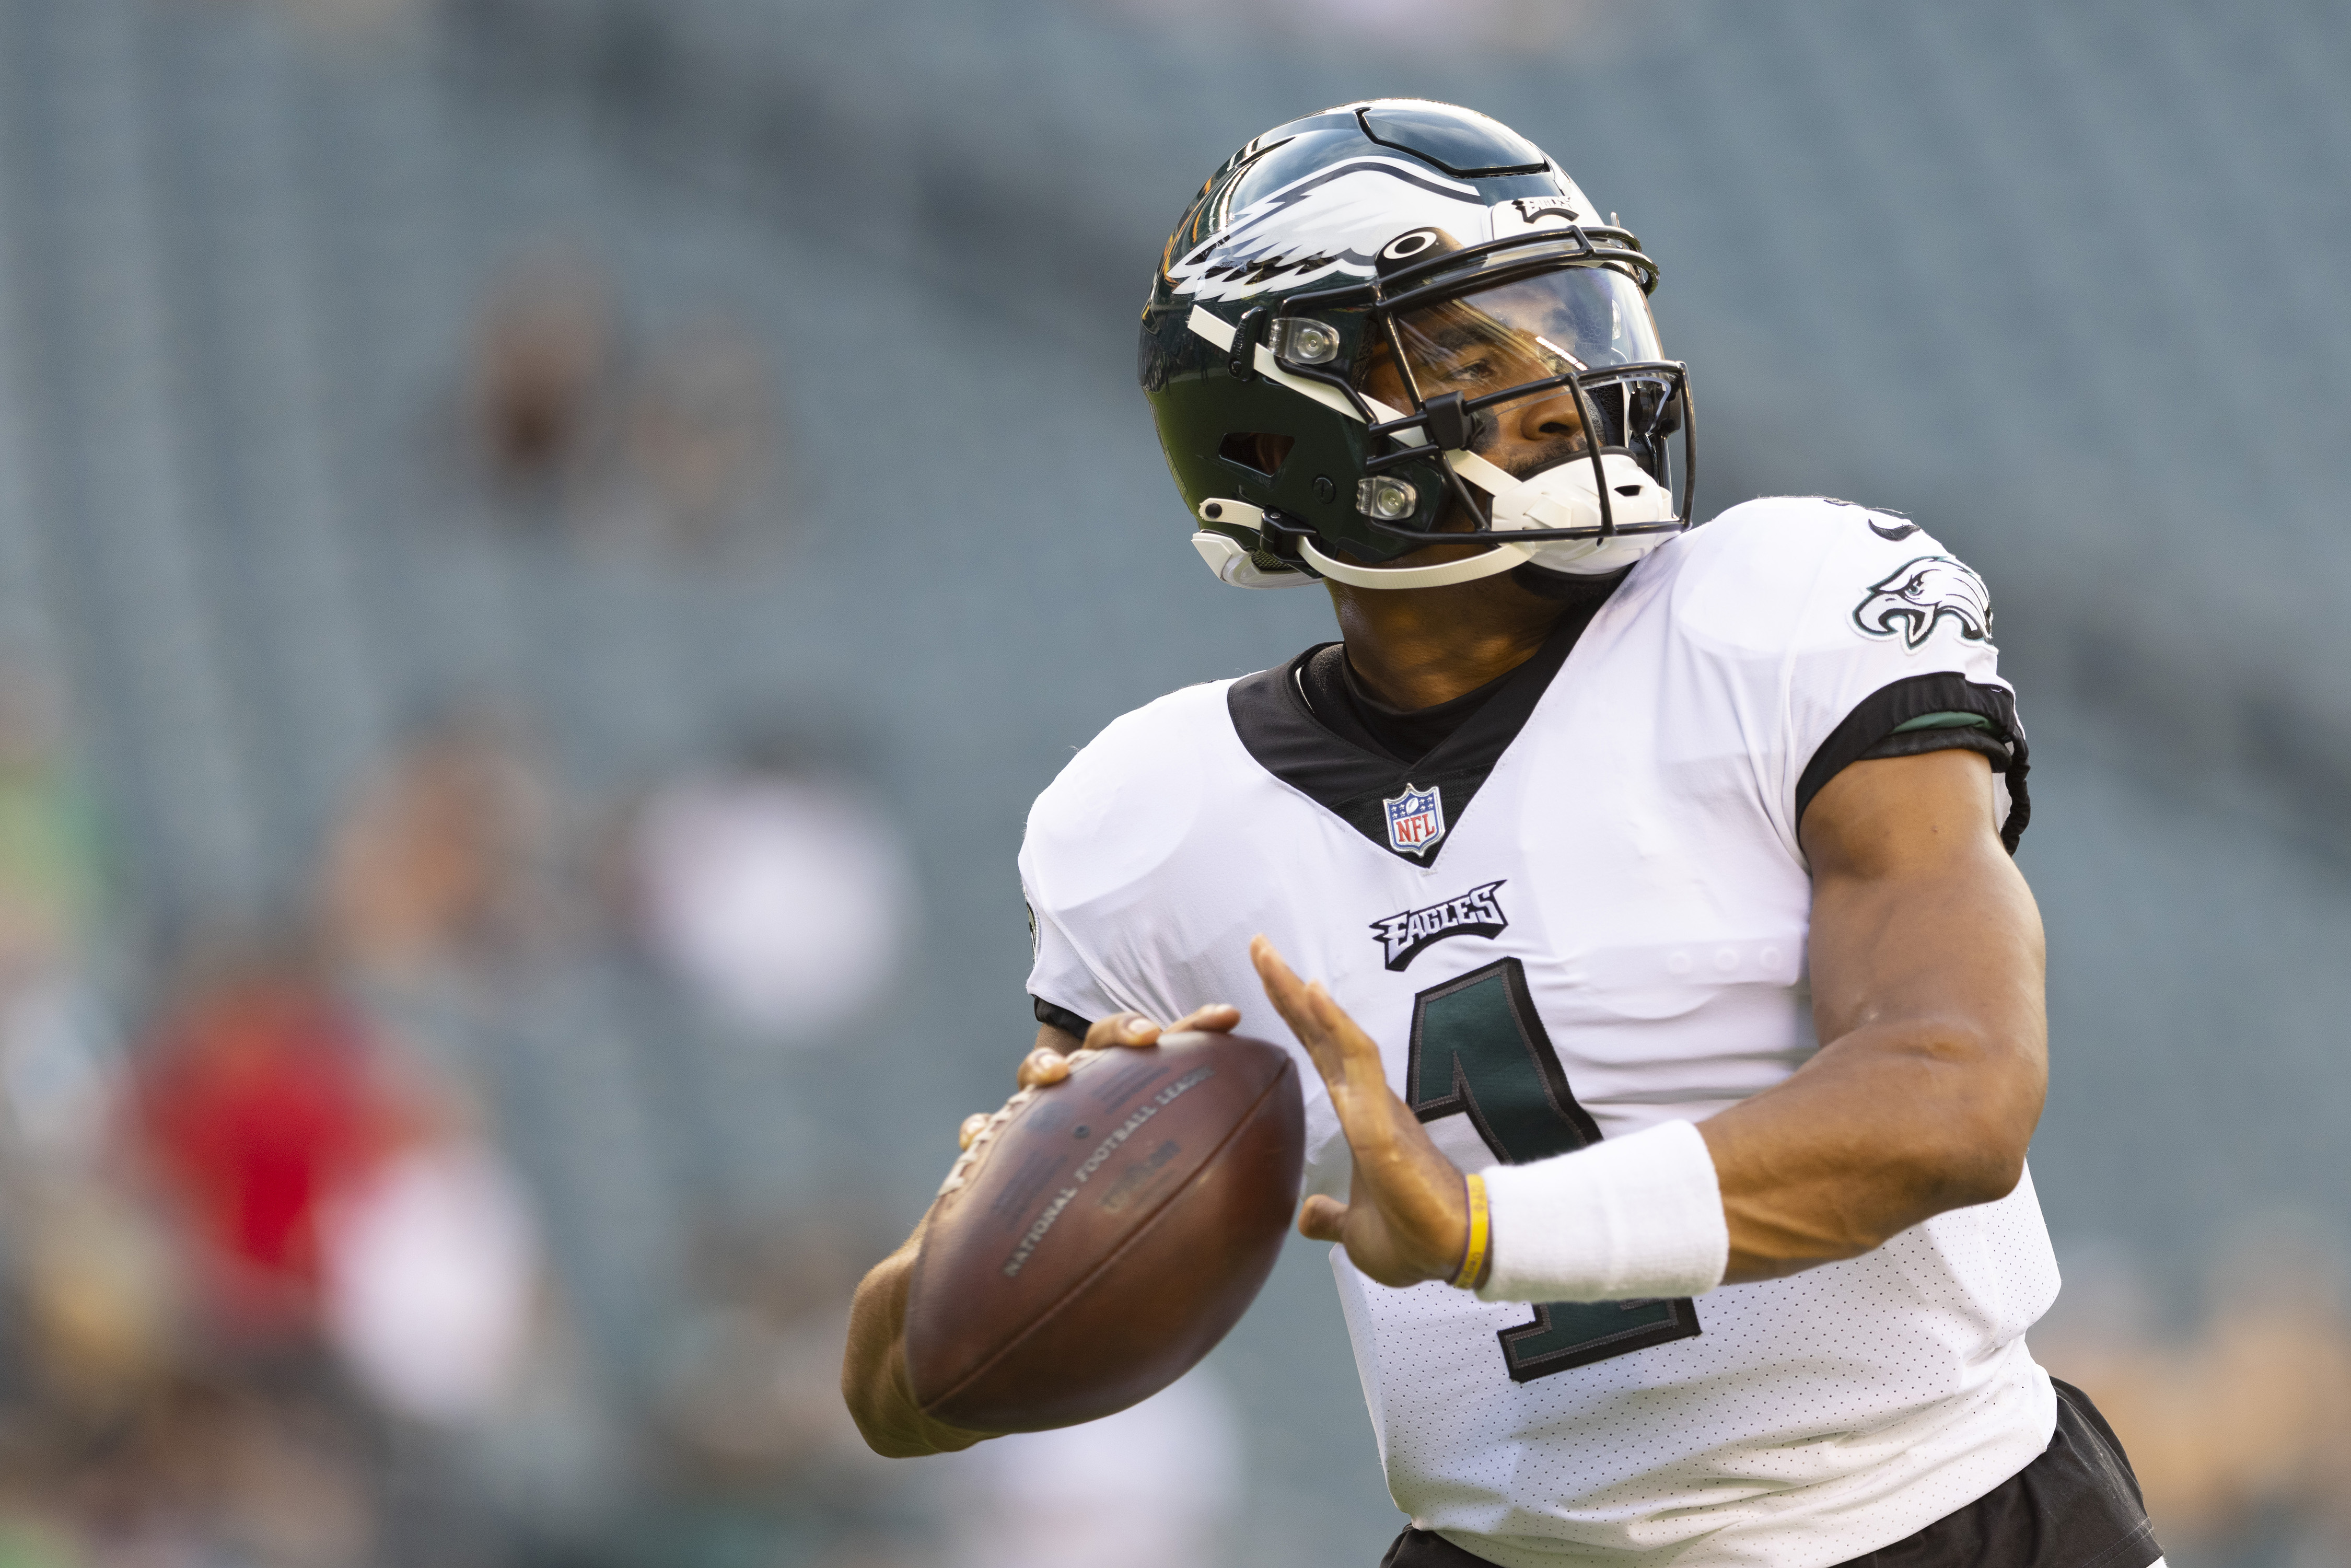 Fantasy Football Picks: Early DraftKings NFL DFS Targets, Values